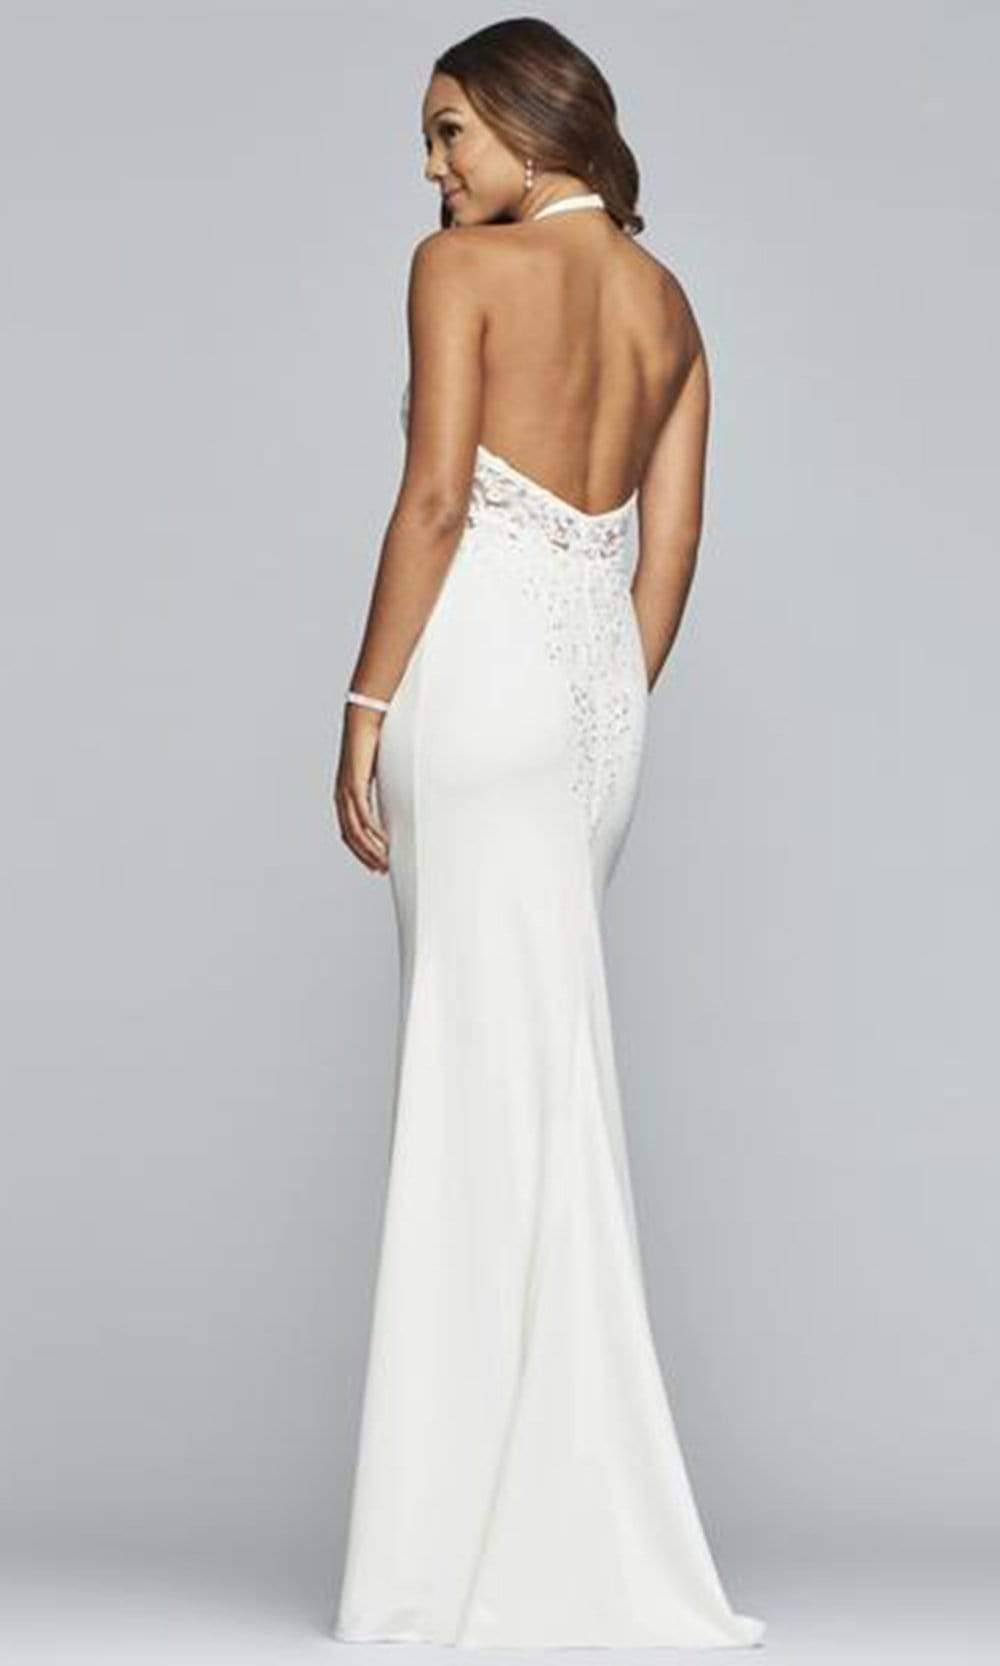 Faviana - Halter Floral Appliqued Sheath Gown S10296SC In White